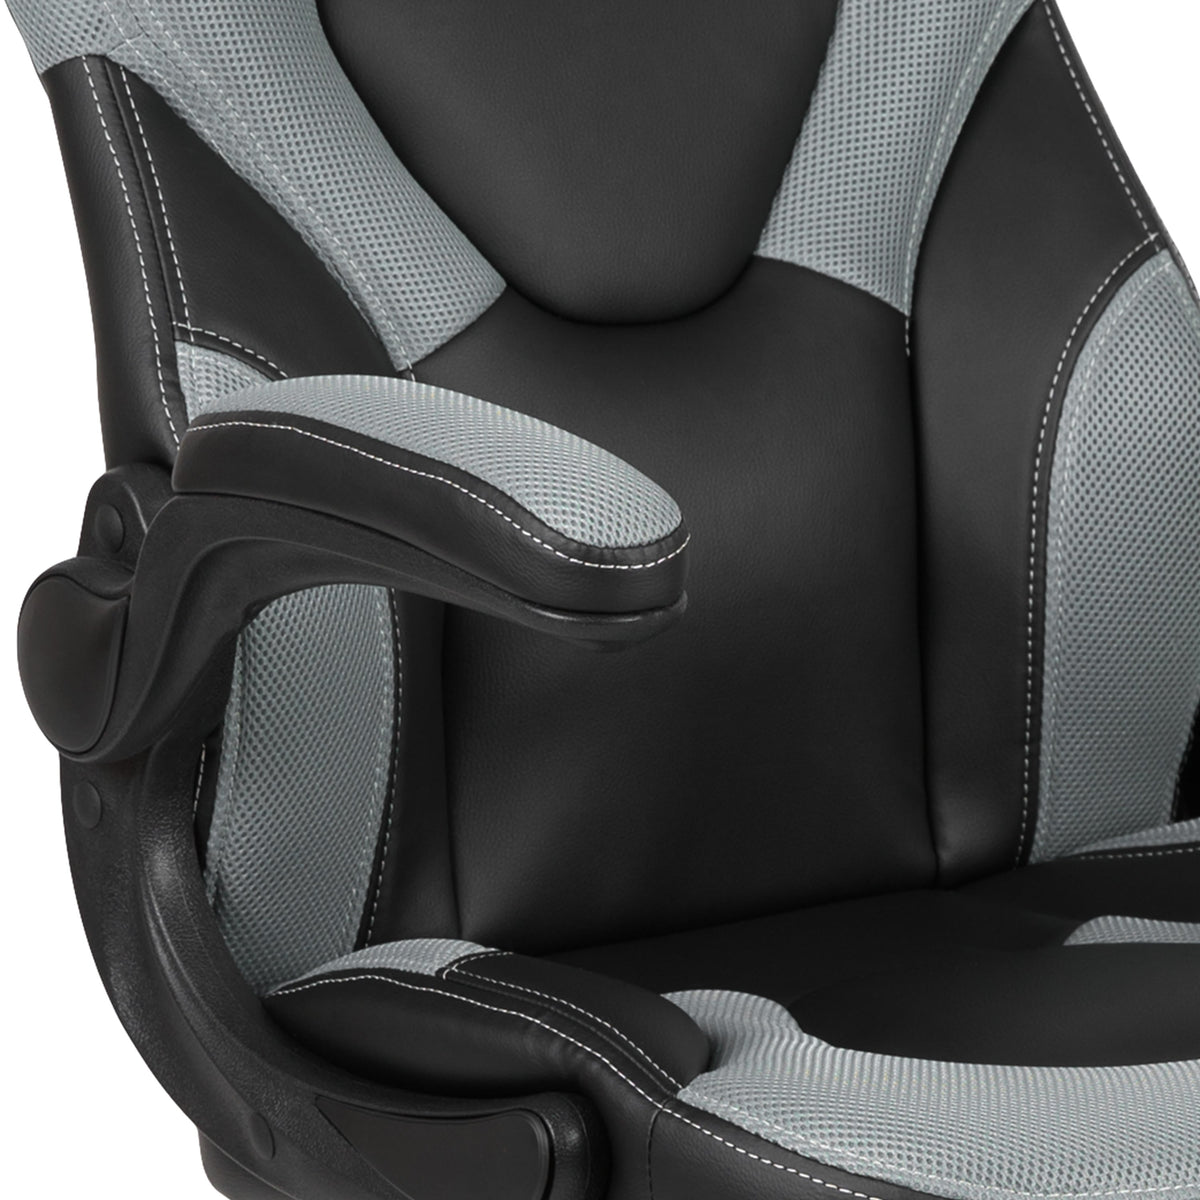 Gray |#| High Back Gray/Black Racing Style Ergonomic Gaming Chair with Flip-Up Arms